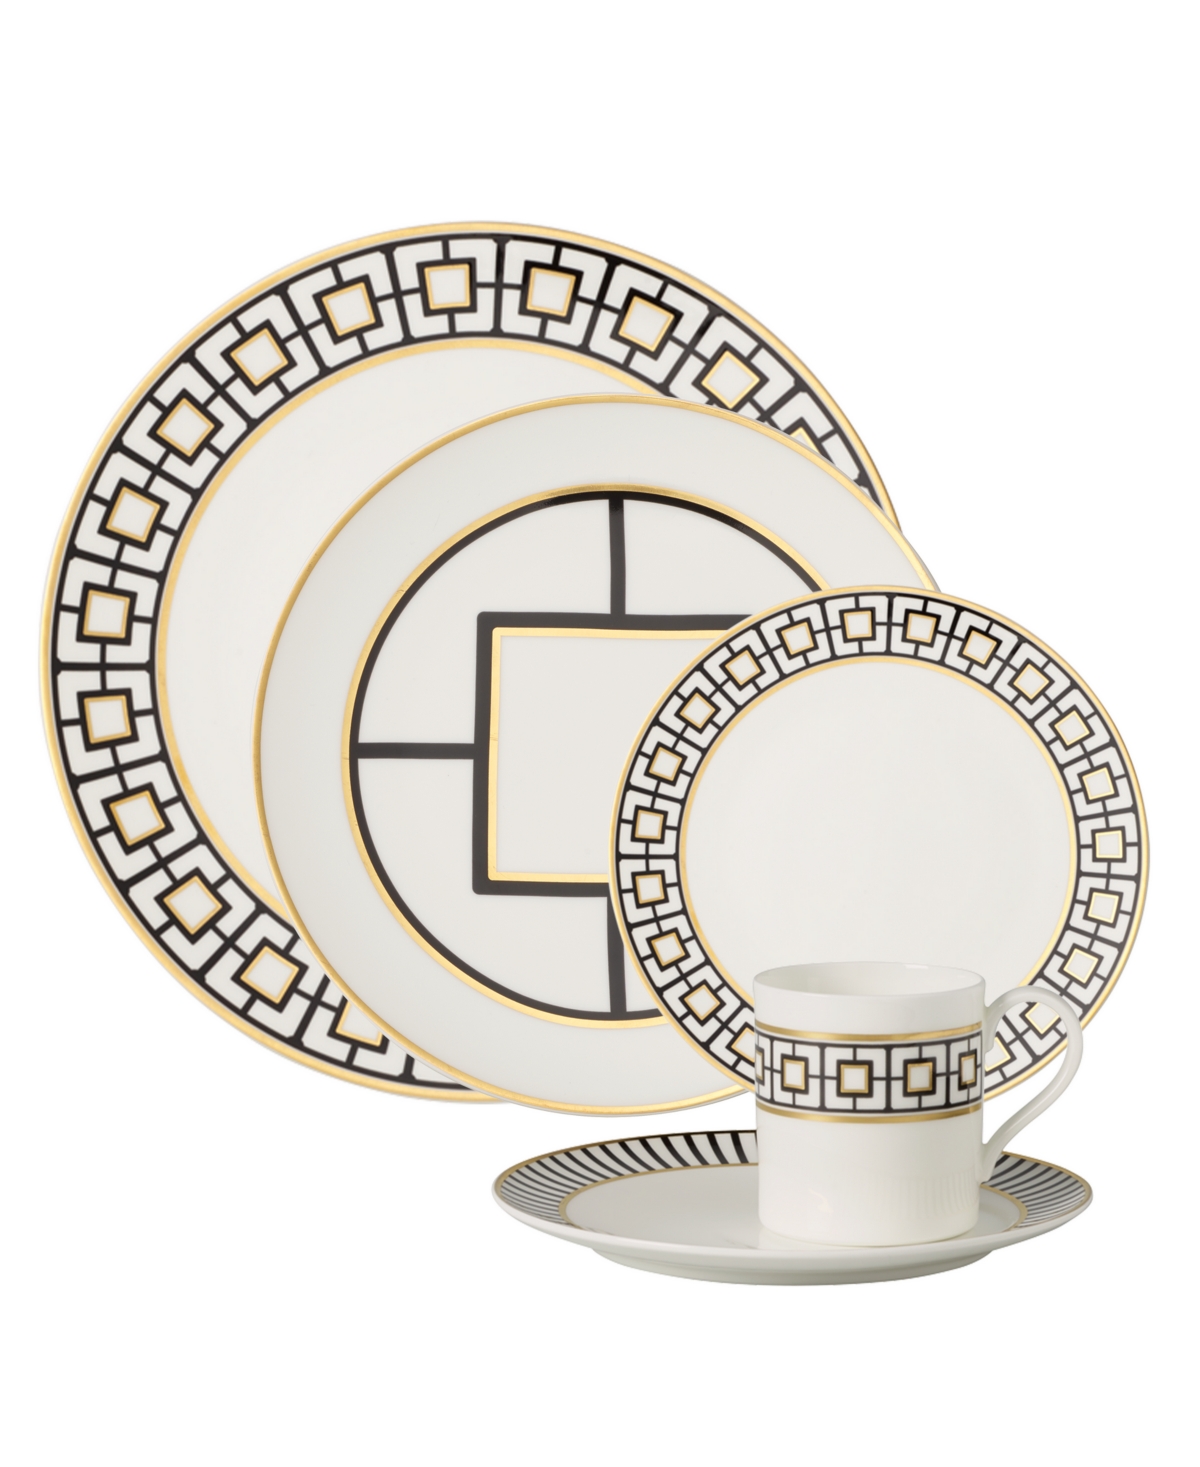 Villeroy & Boch Metro Chic 5 Piece Place Setting